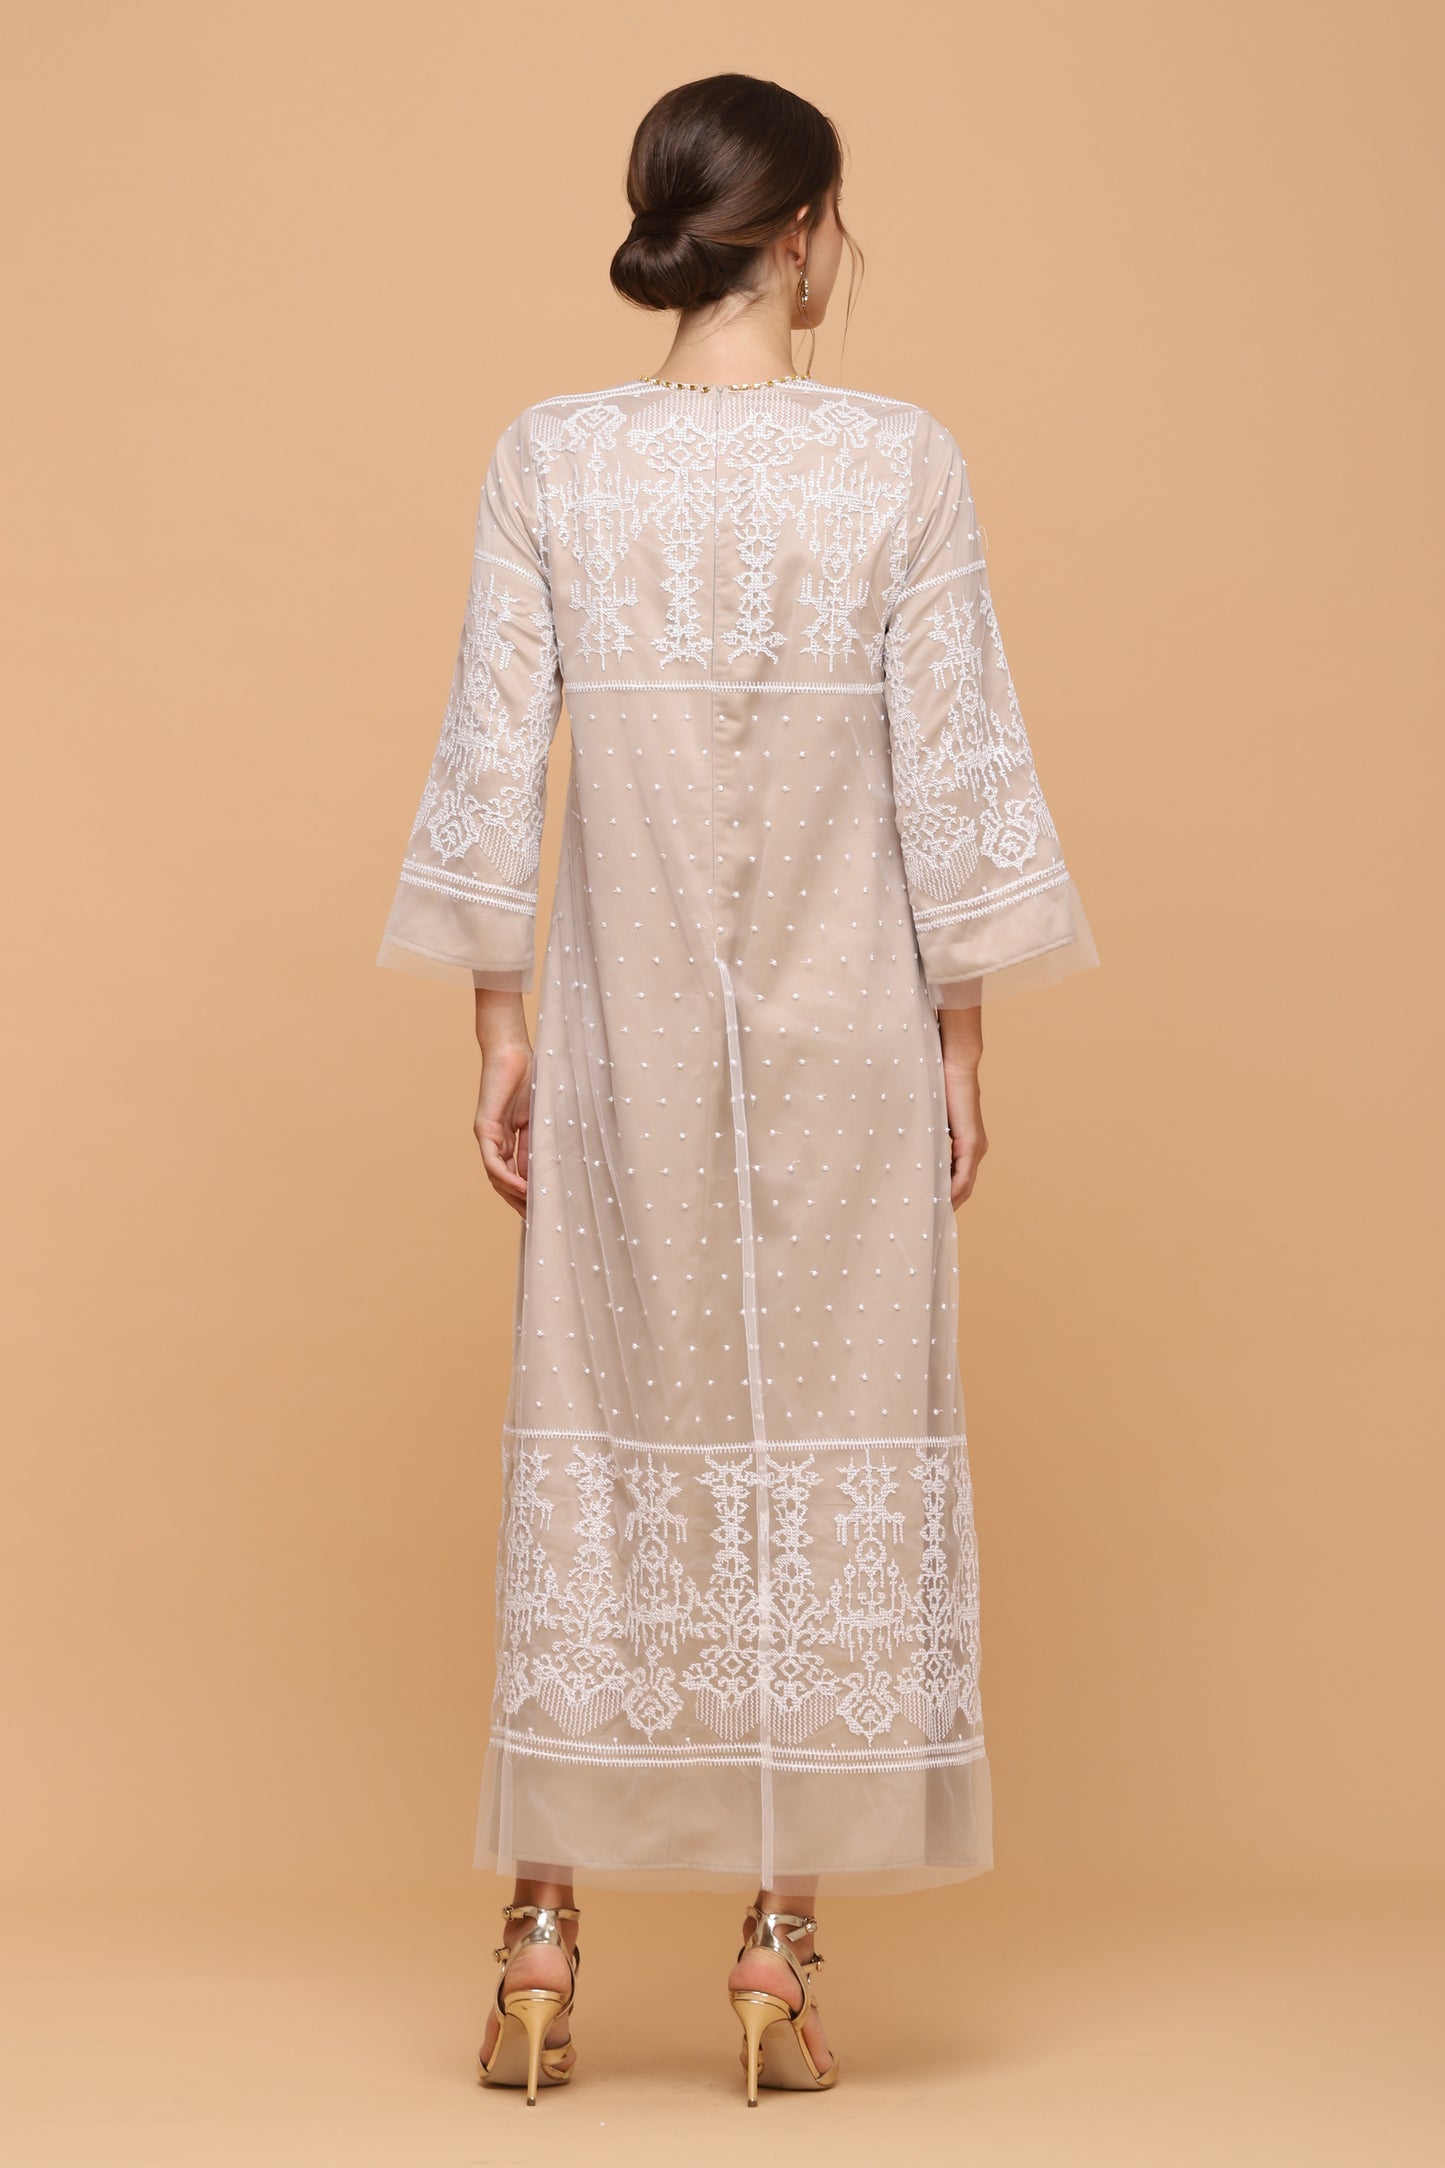 Kindness - White Lace on Beige Maxi Dress